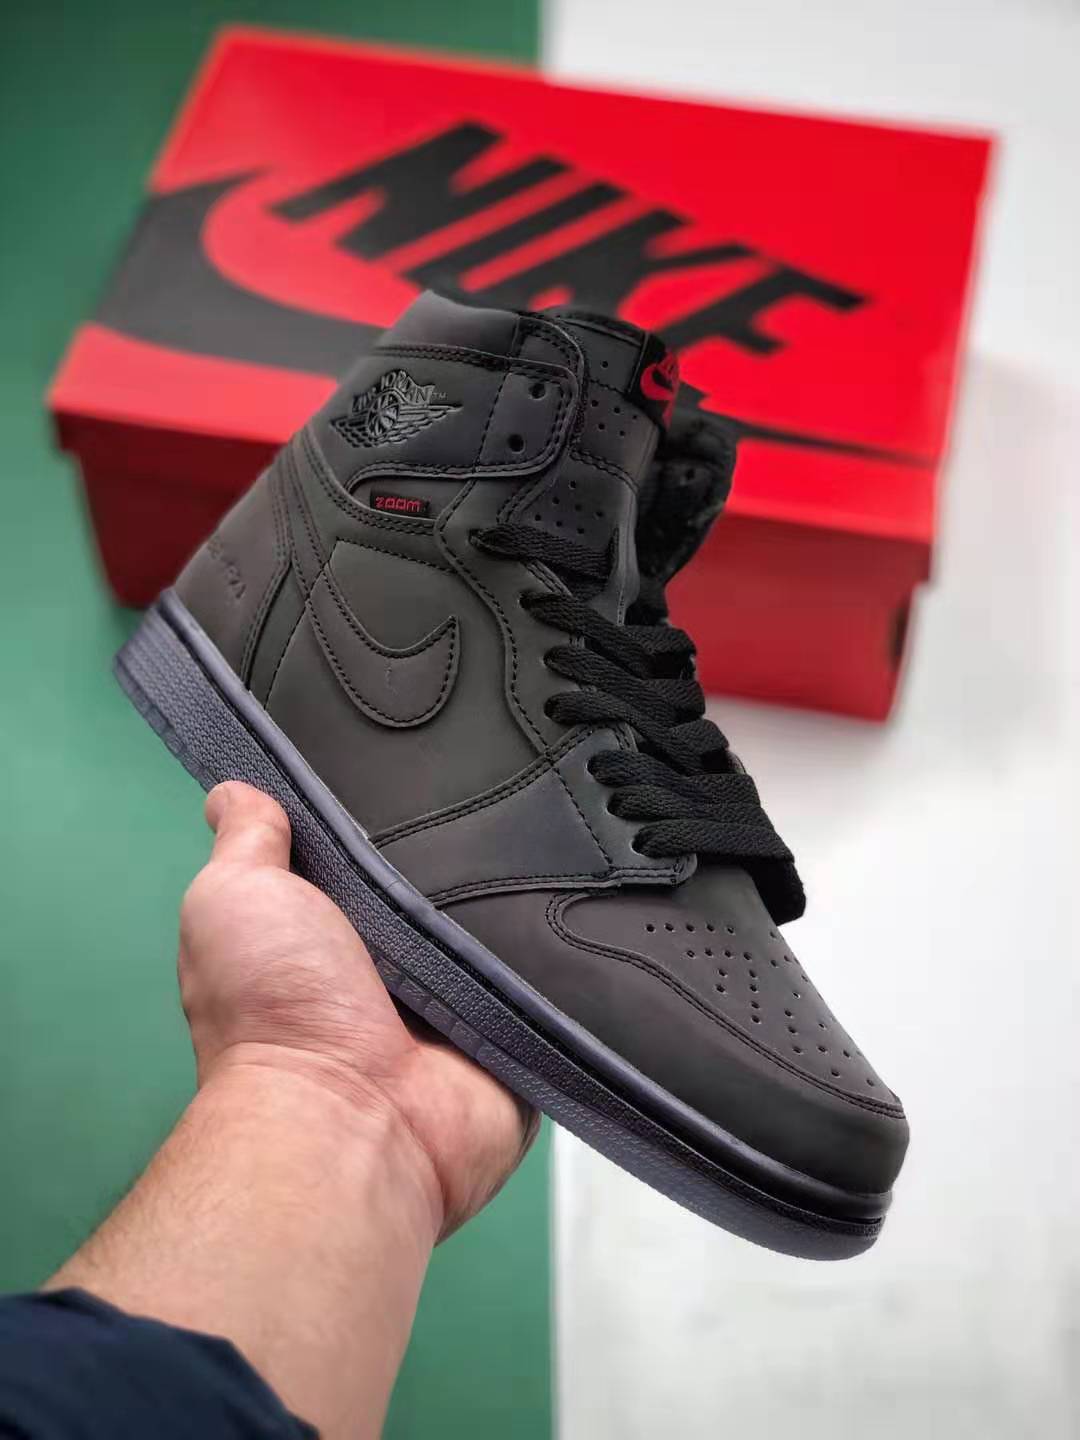 Air Jordan 1 Retro High Zoom 'Fearless' BV0006-900 – Iconic Style and Supreme Comfort